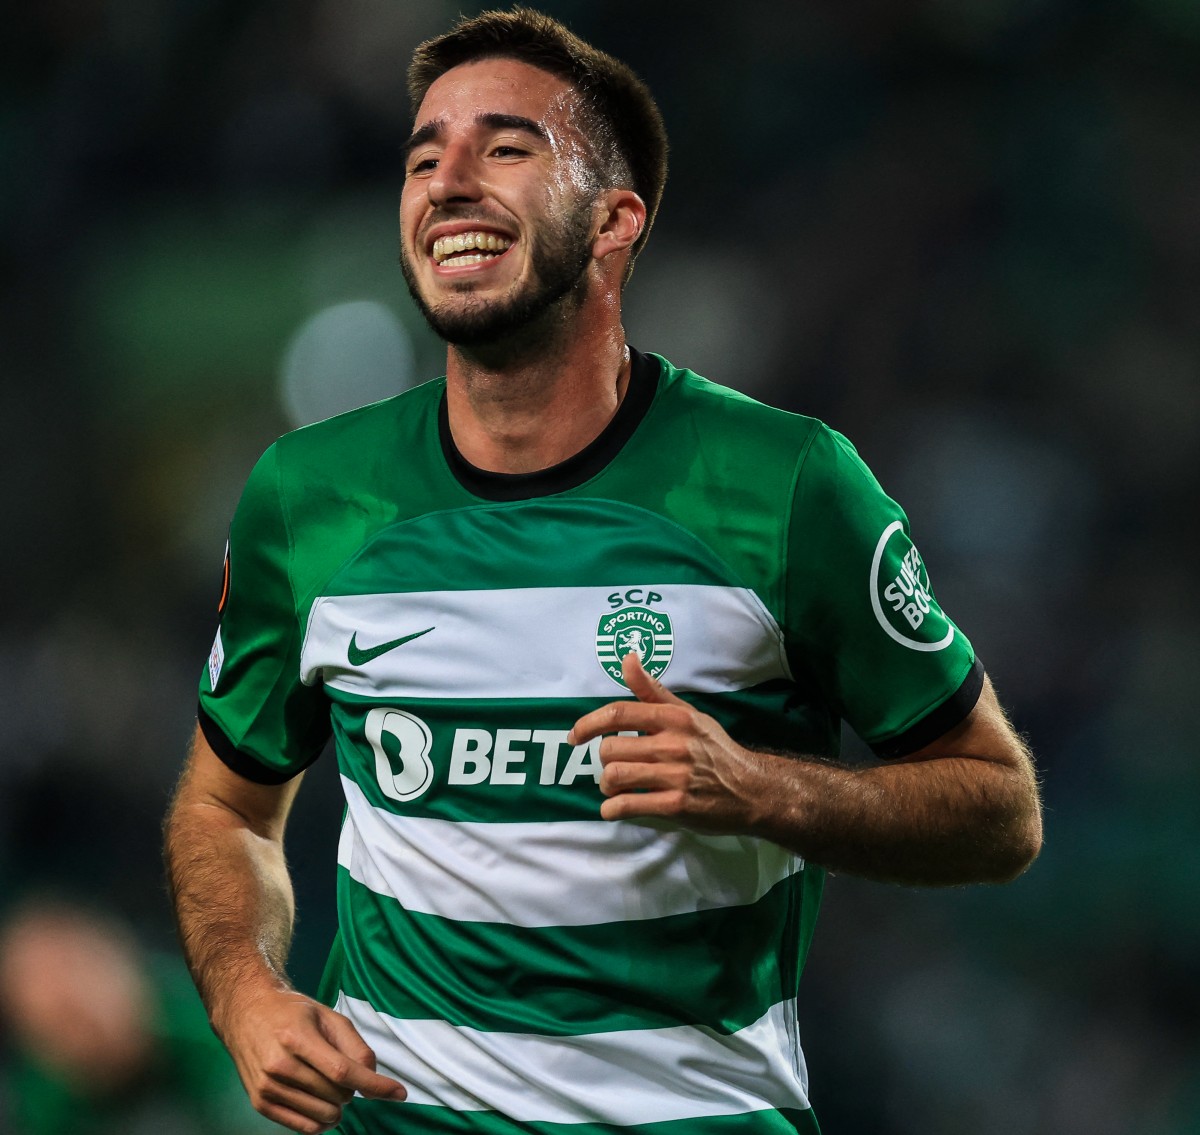 Newcastle United are lining up a move for Sporting CP duo Goncalo Inacio and Ousmane Diomande.